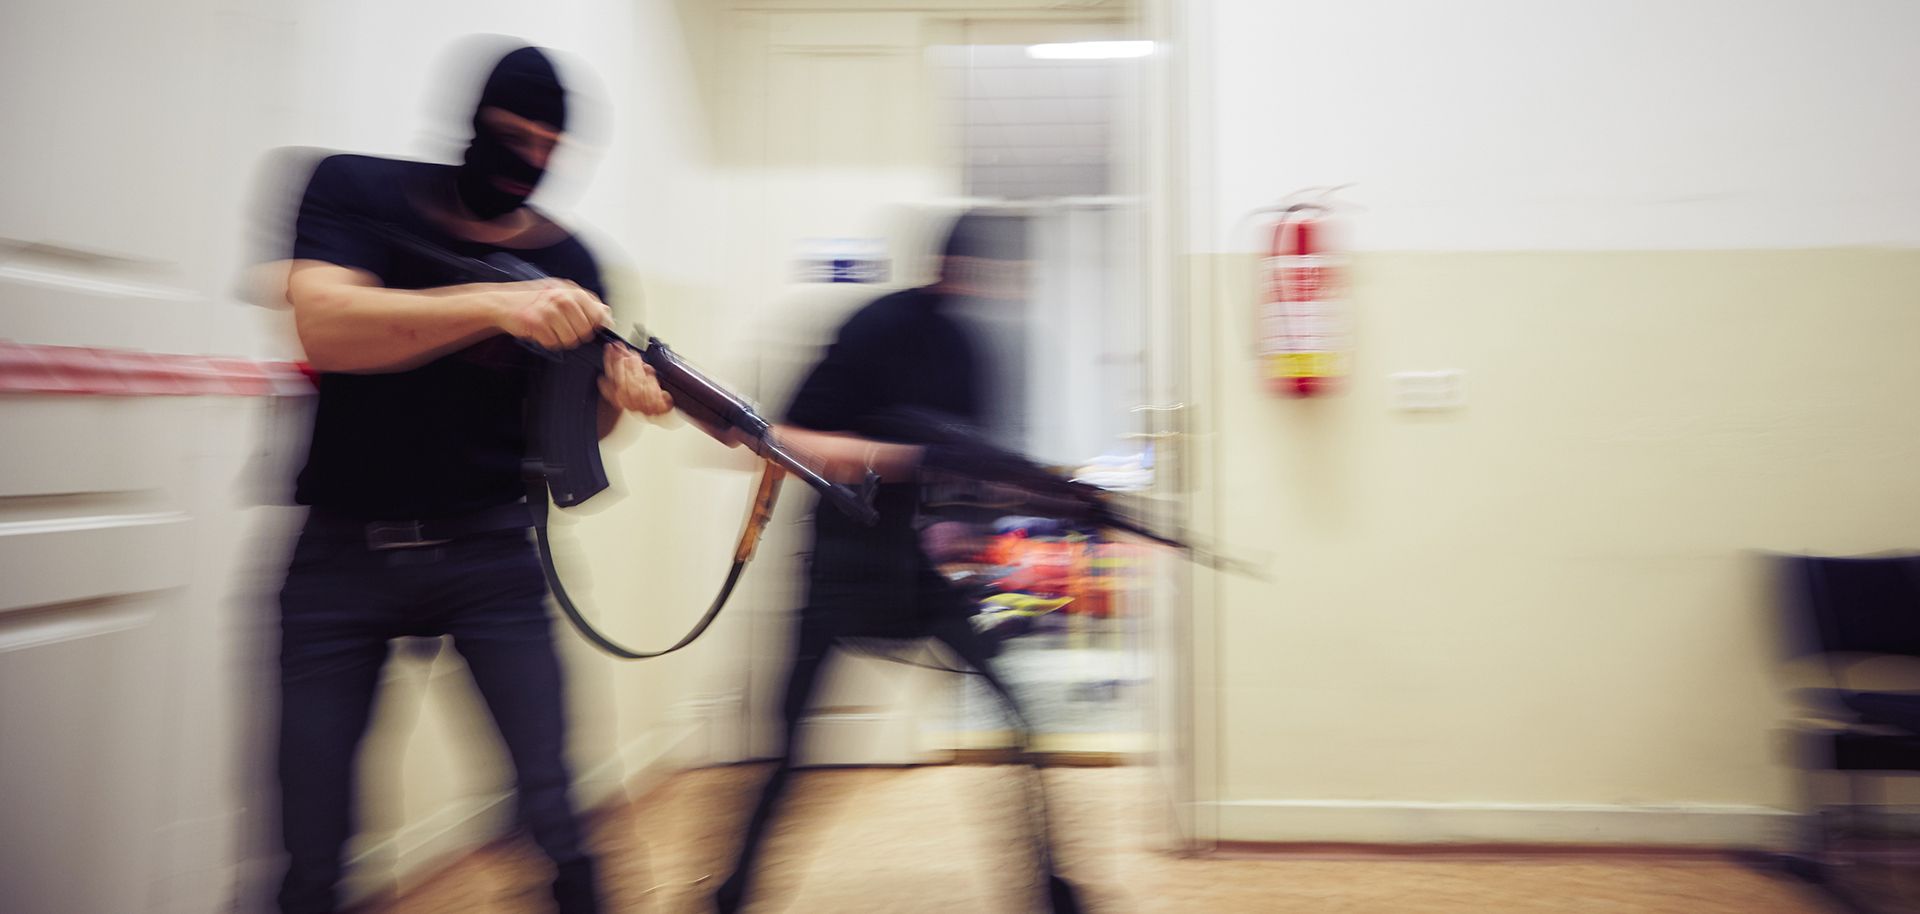 How to counter armed terrorist assaults